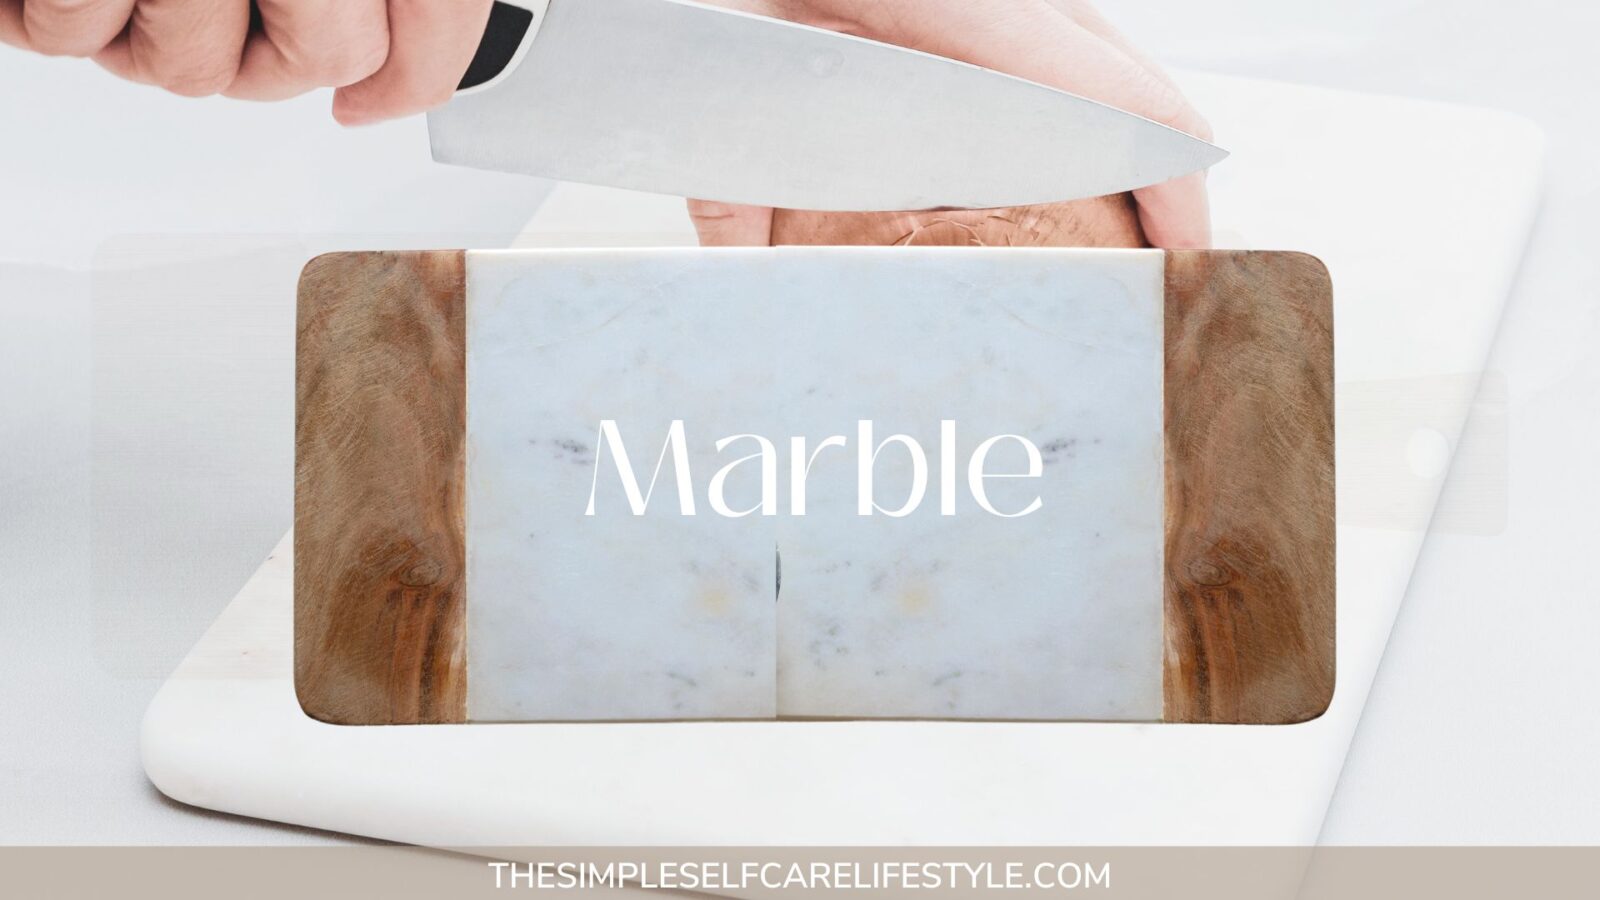 Hands in background holding a knife and cutting into an onion on a Non-toxic Cutting Board made from Marble. Forefront the word Marble.